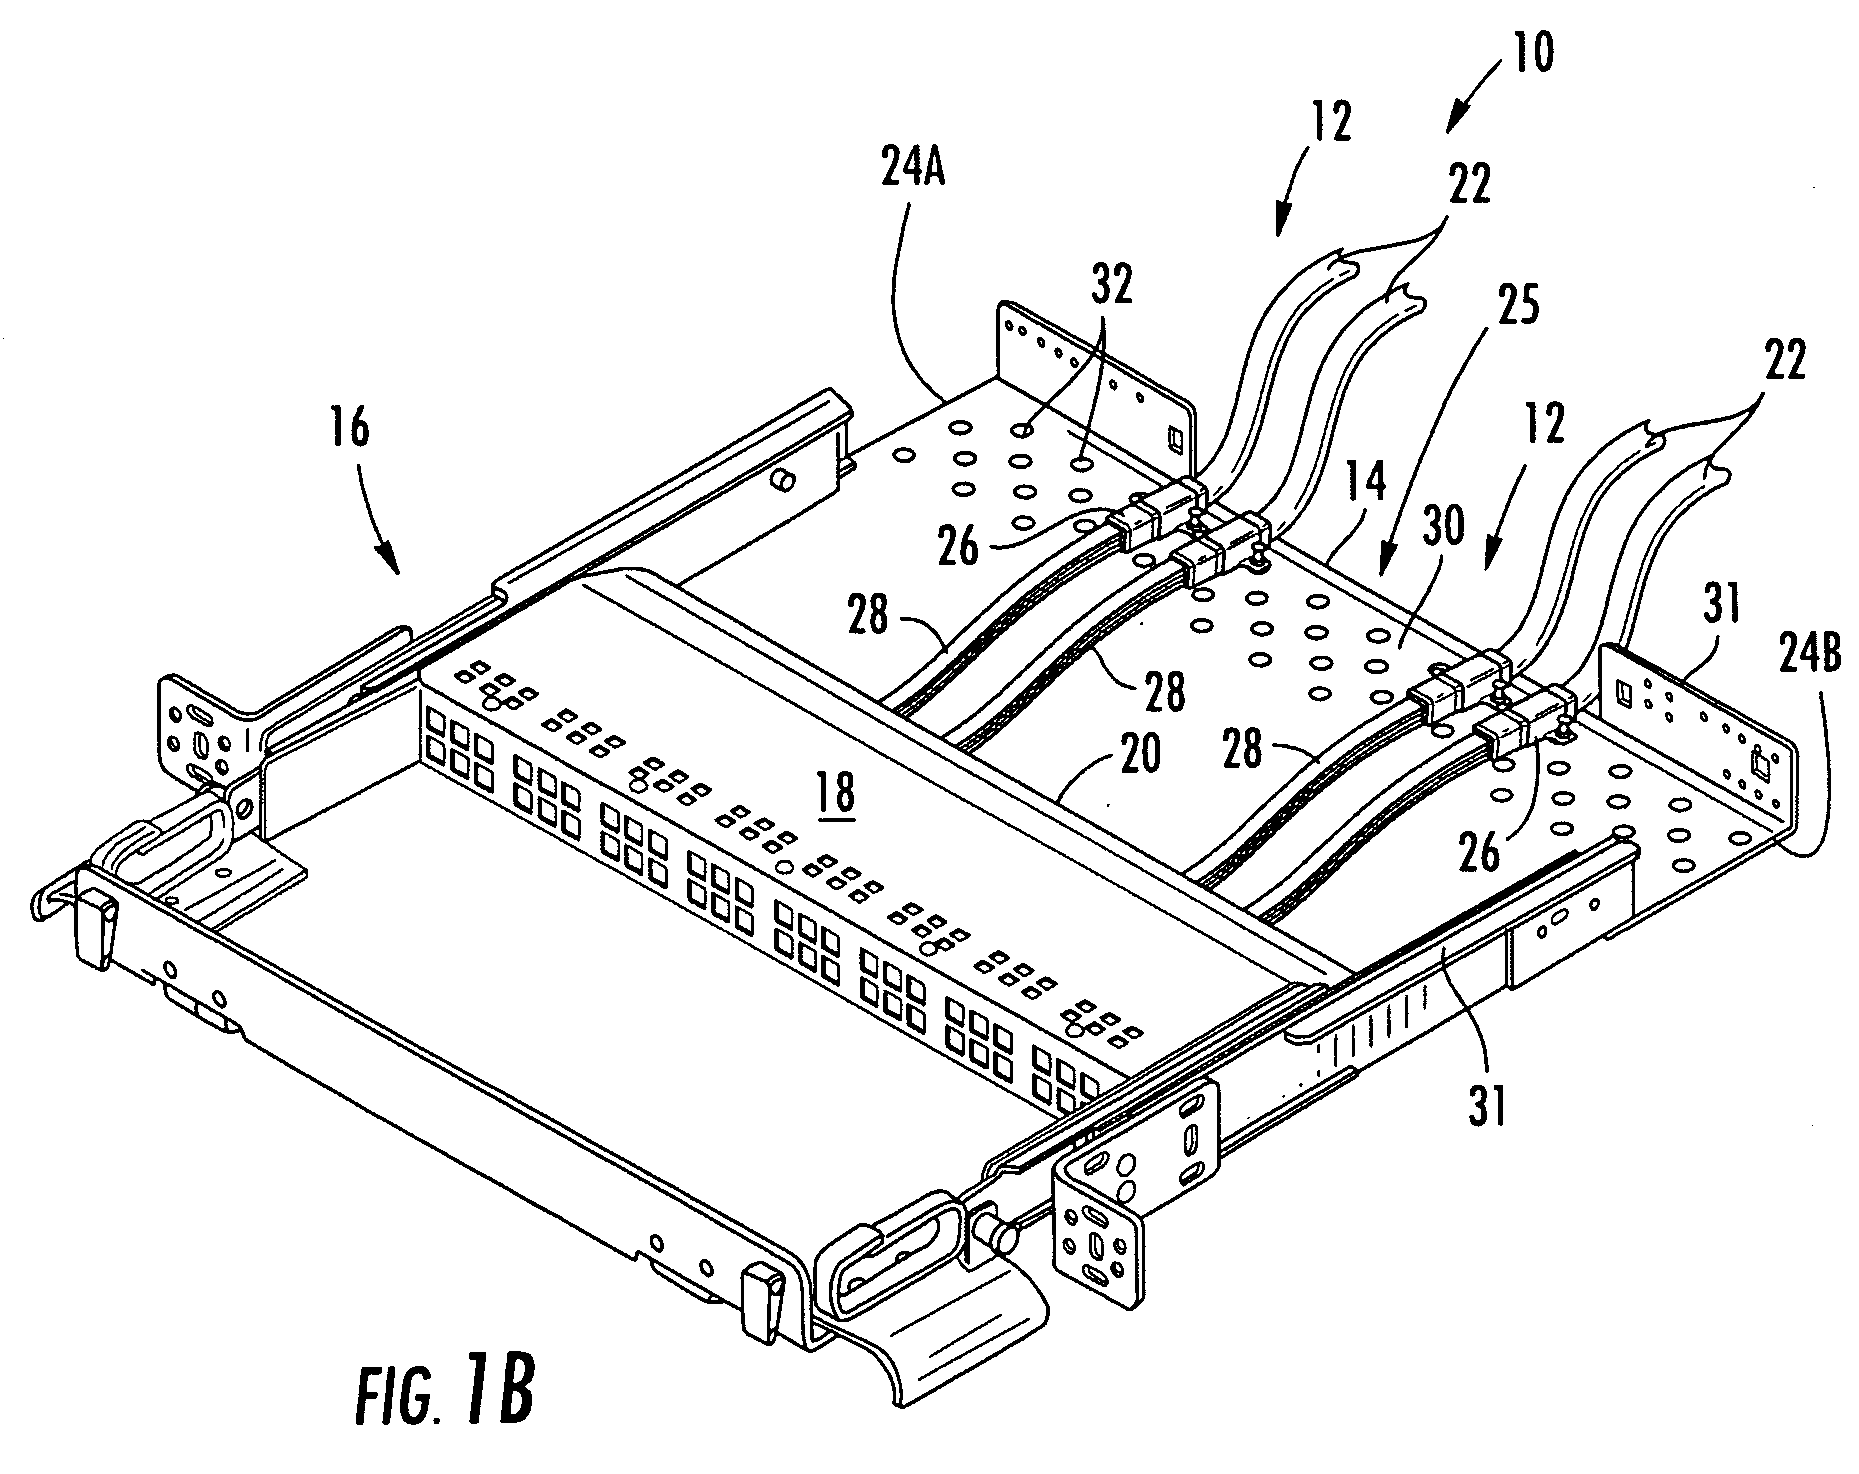 Structures for Managing and Mounting Cable Assemblies